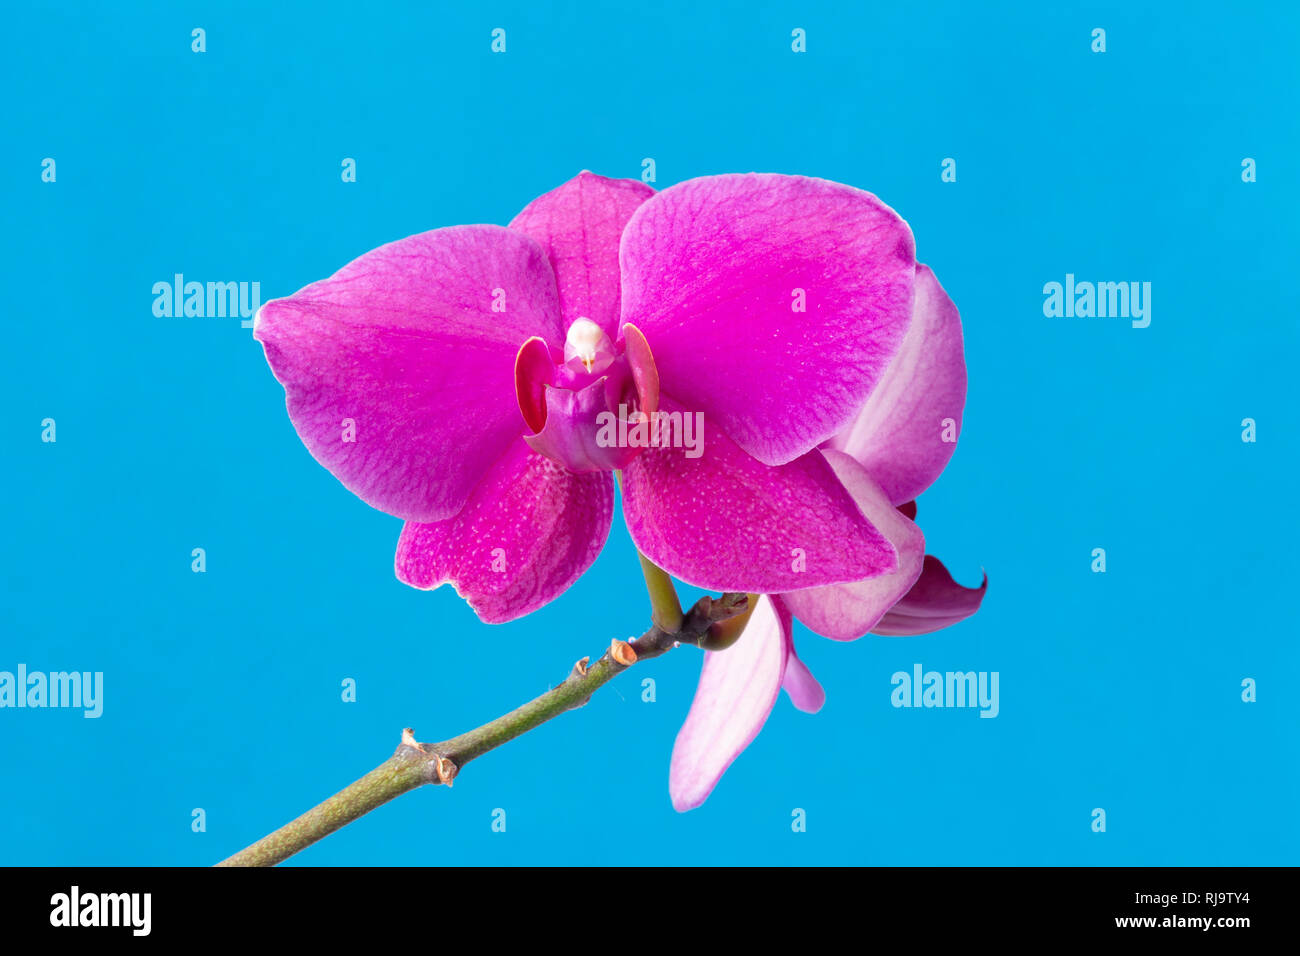 A bunch of violet color orchid flowers s on a blue background. Stock Photo